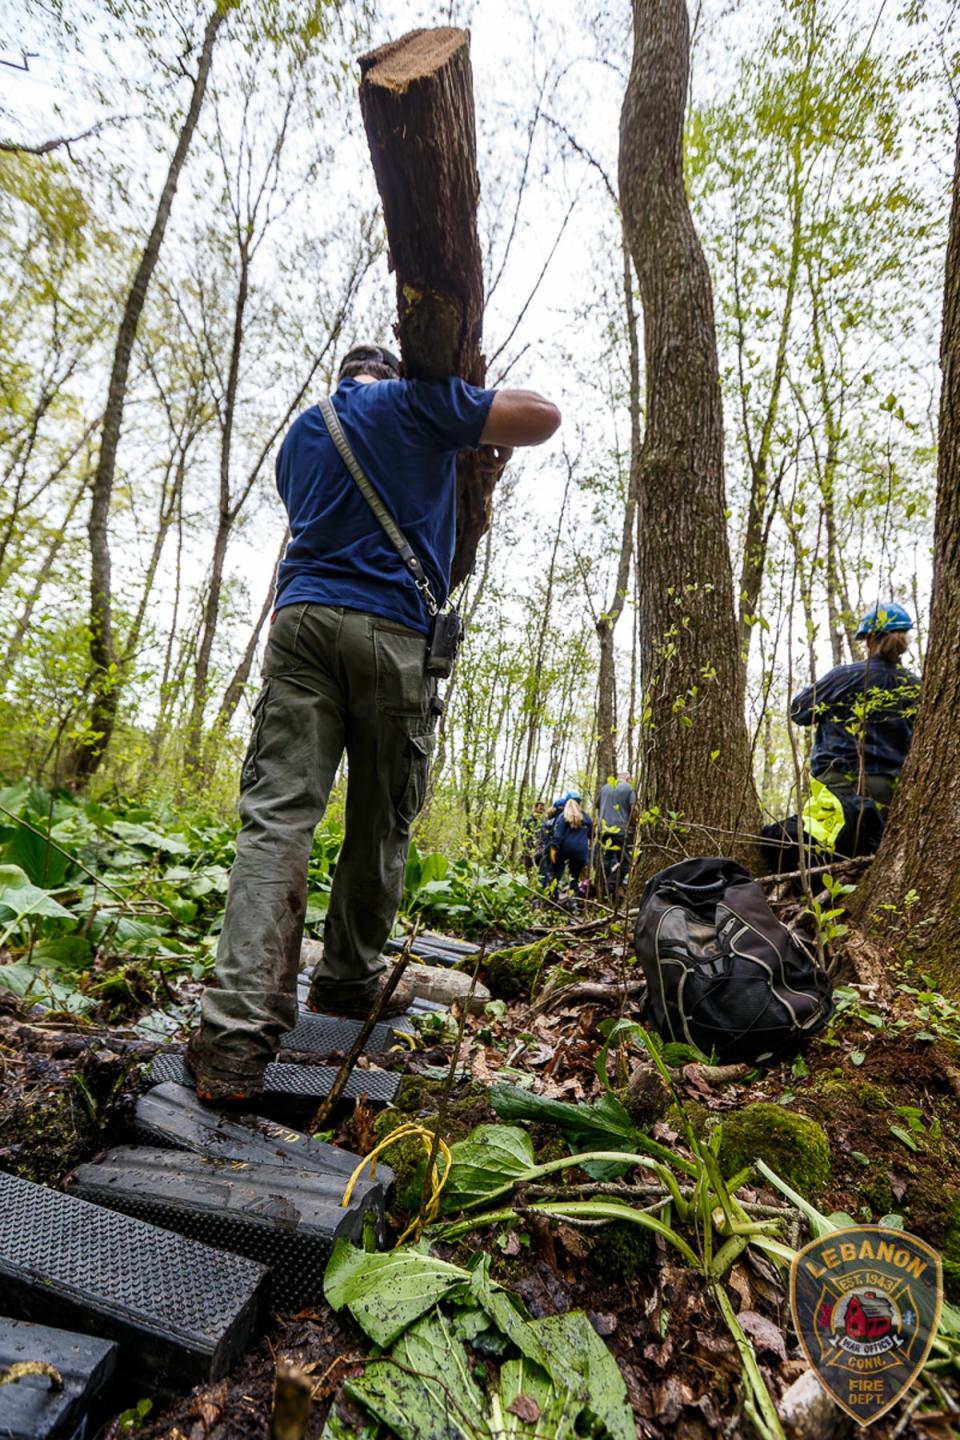 Rescue personnel used logs and other equipment to make a more stable path through the swampy woods (LVFD)